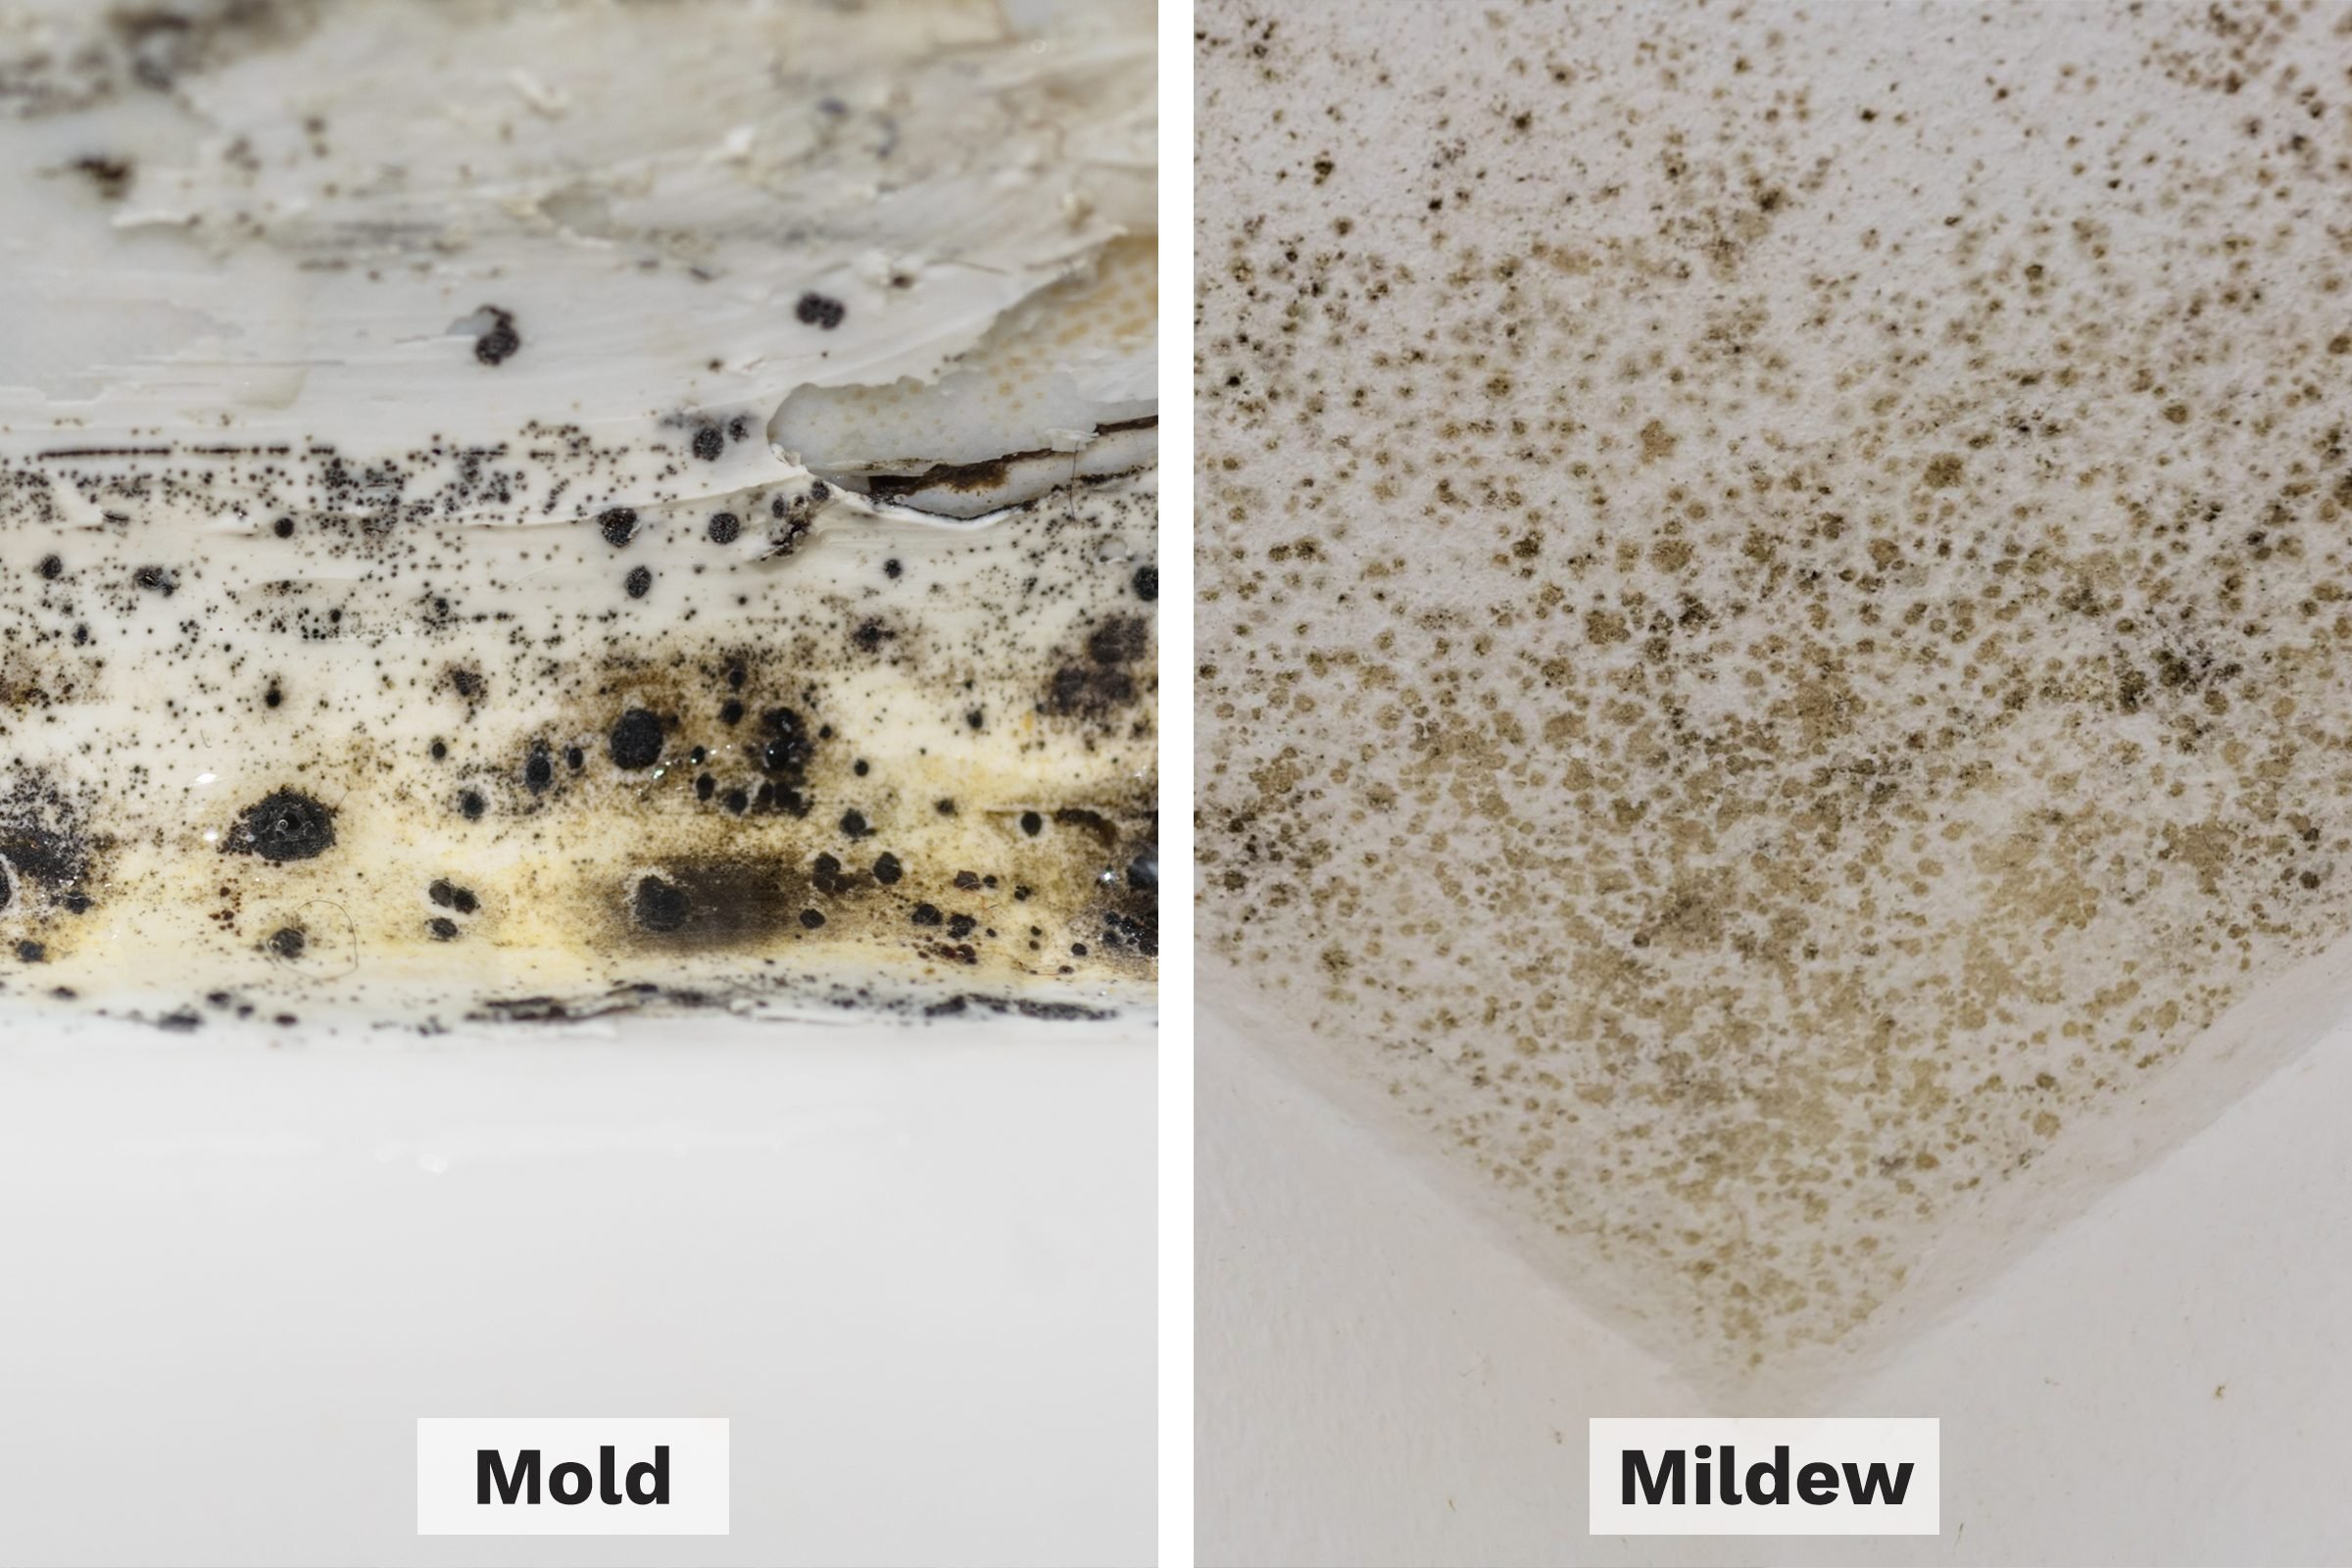 https://www.thehealthy.com/wp-content/uploads/2021/10/mold-vs-mildew-side-by-side_getty.jpg